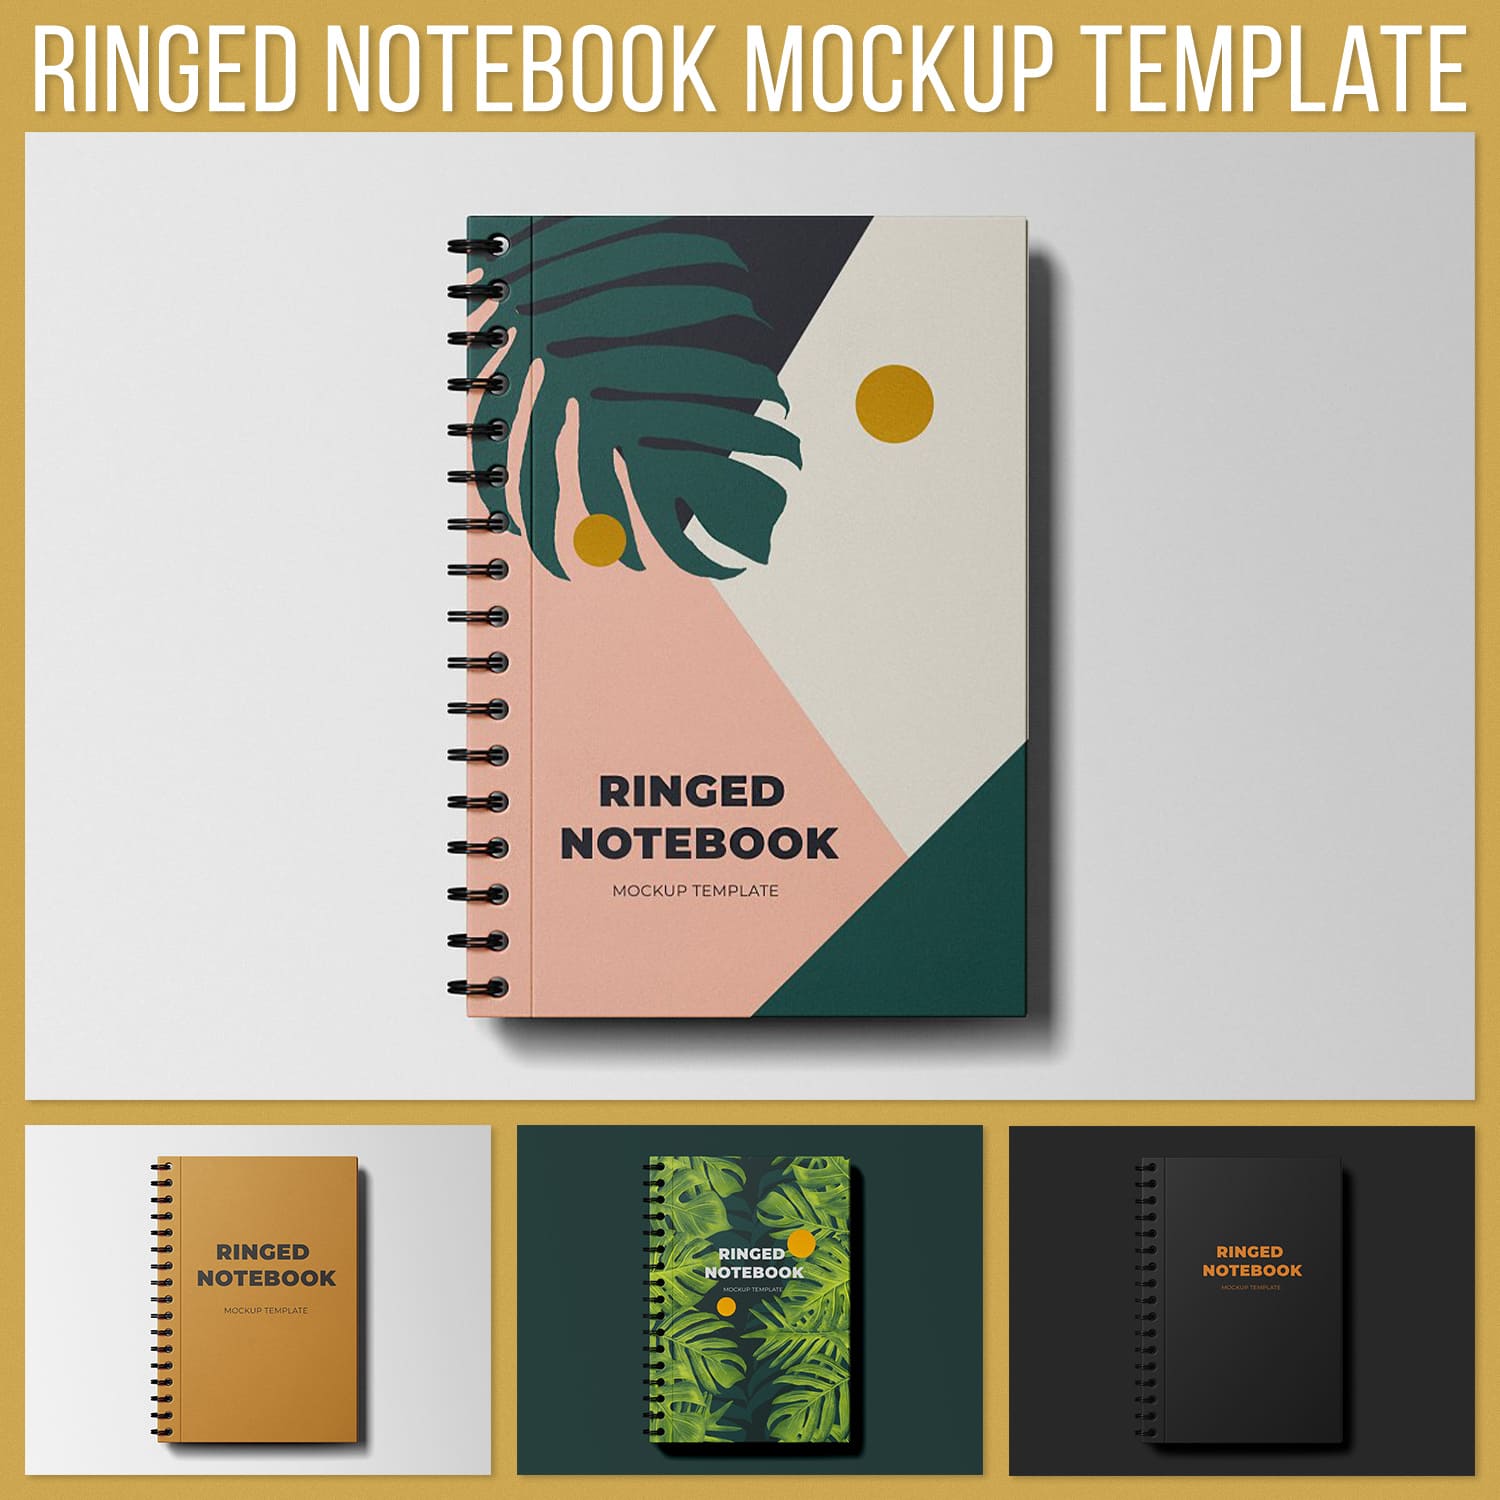 Ringed Notebook Mockup Template.